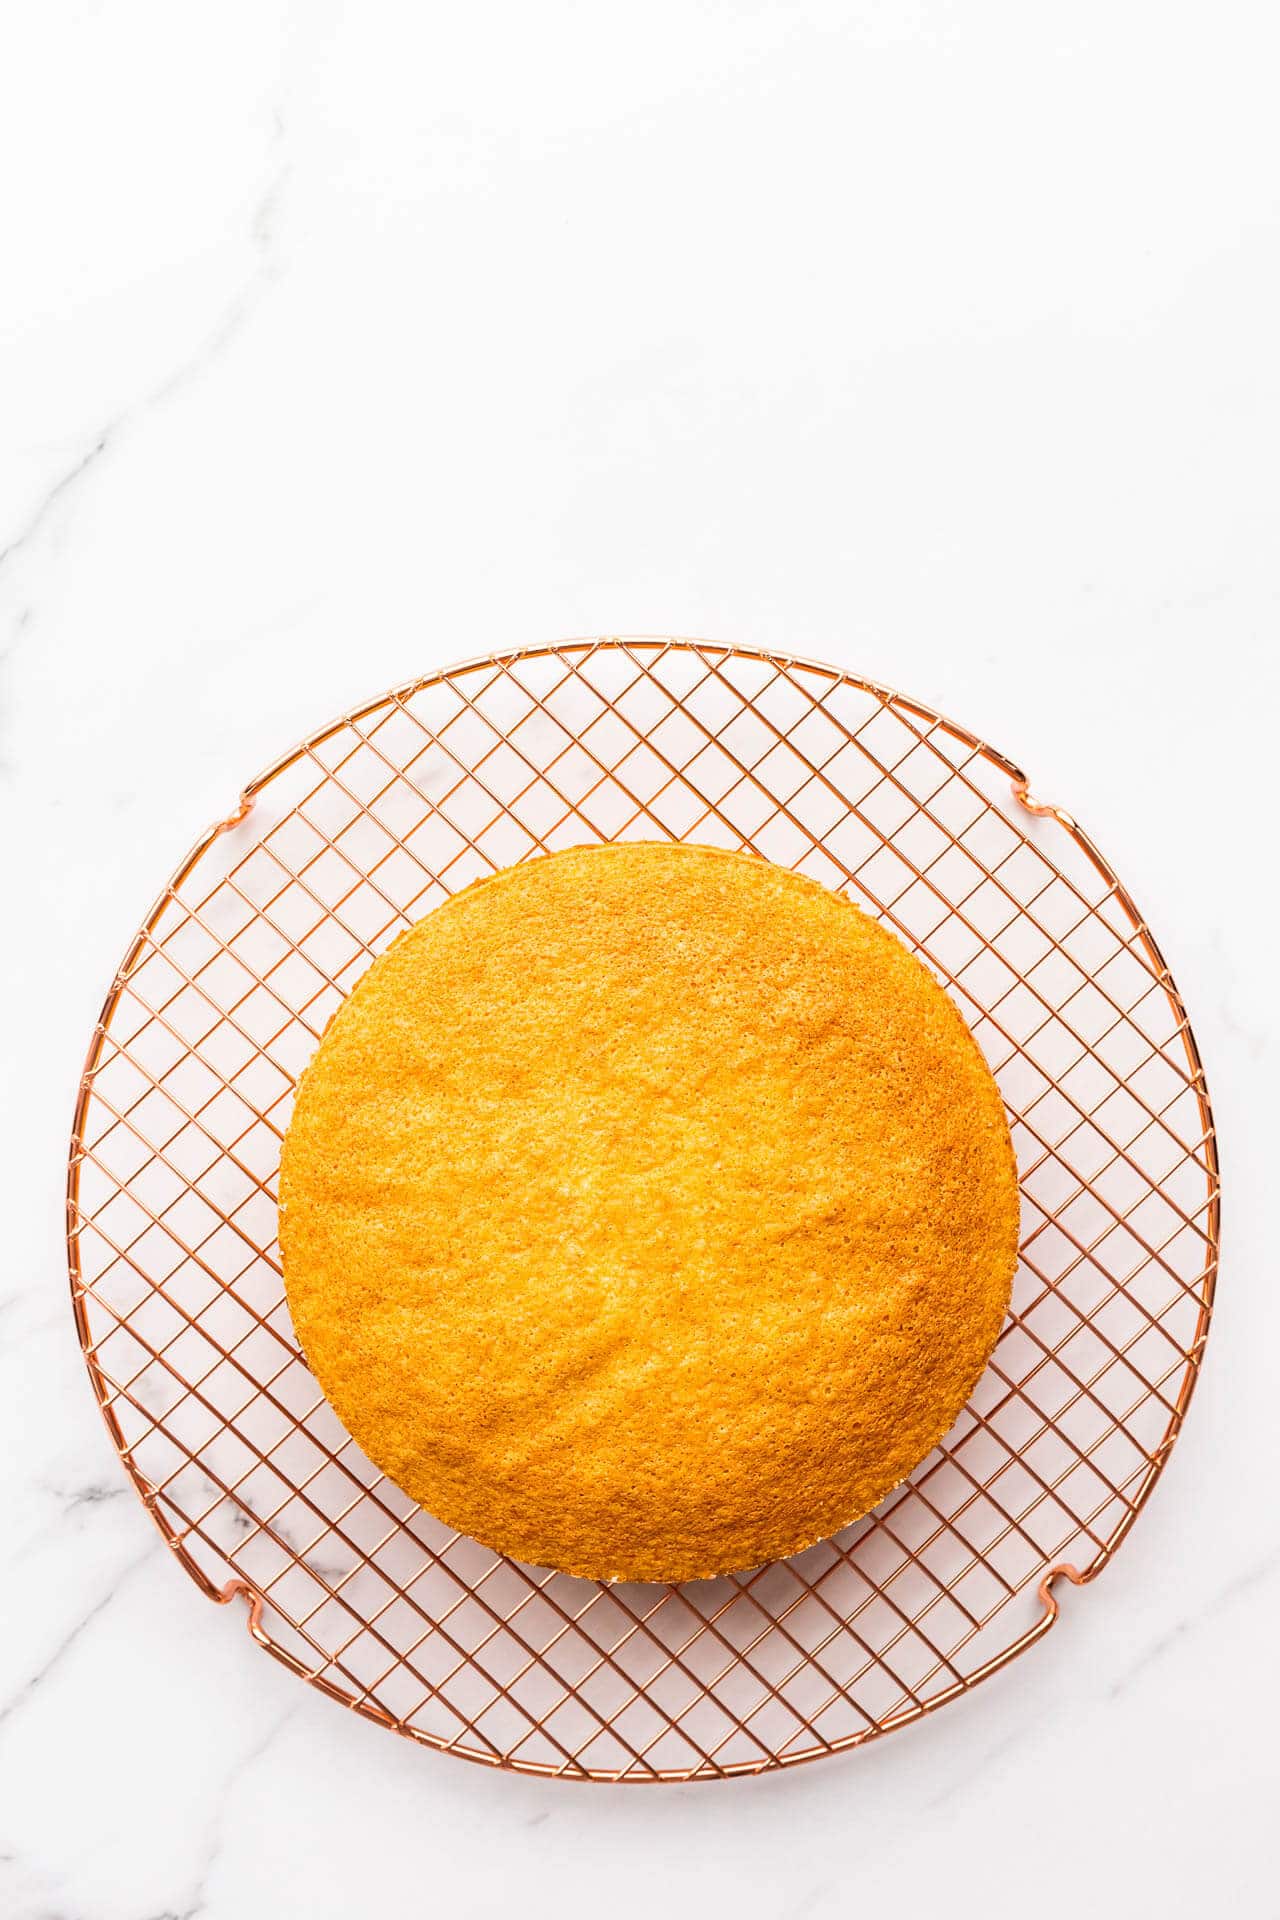 Sponge cake cooling on a wire rack.